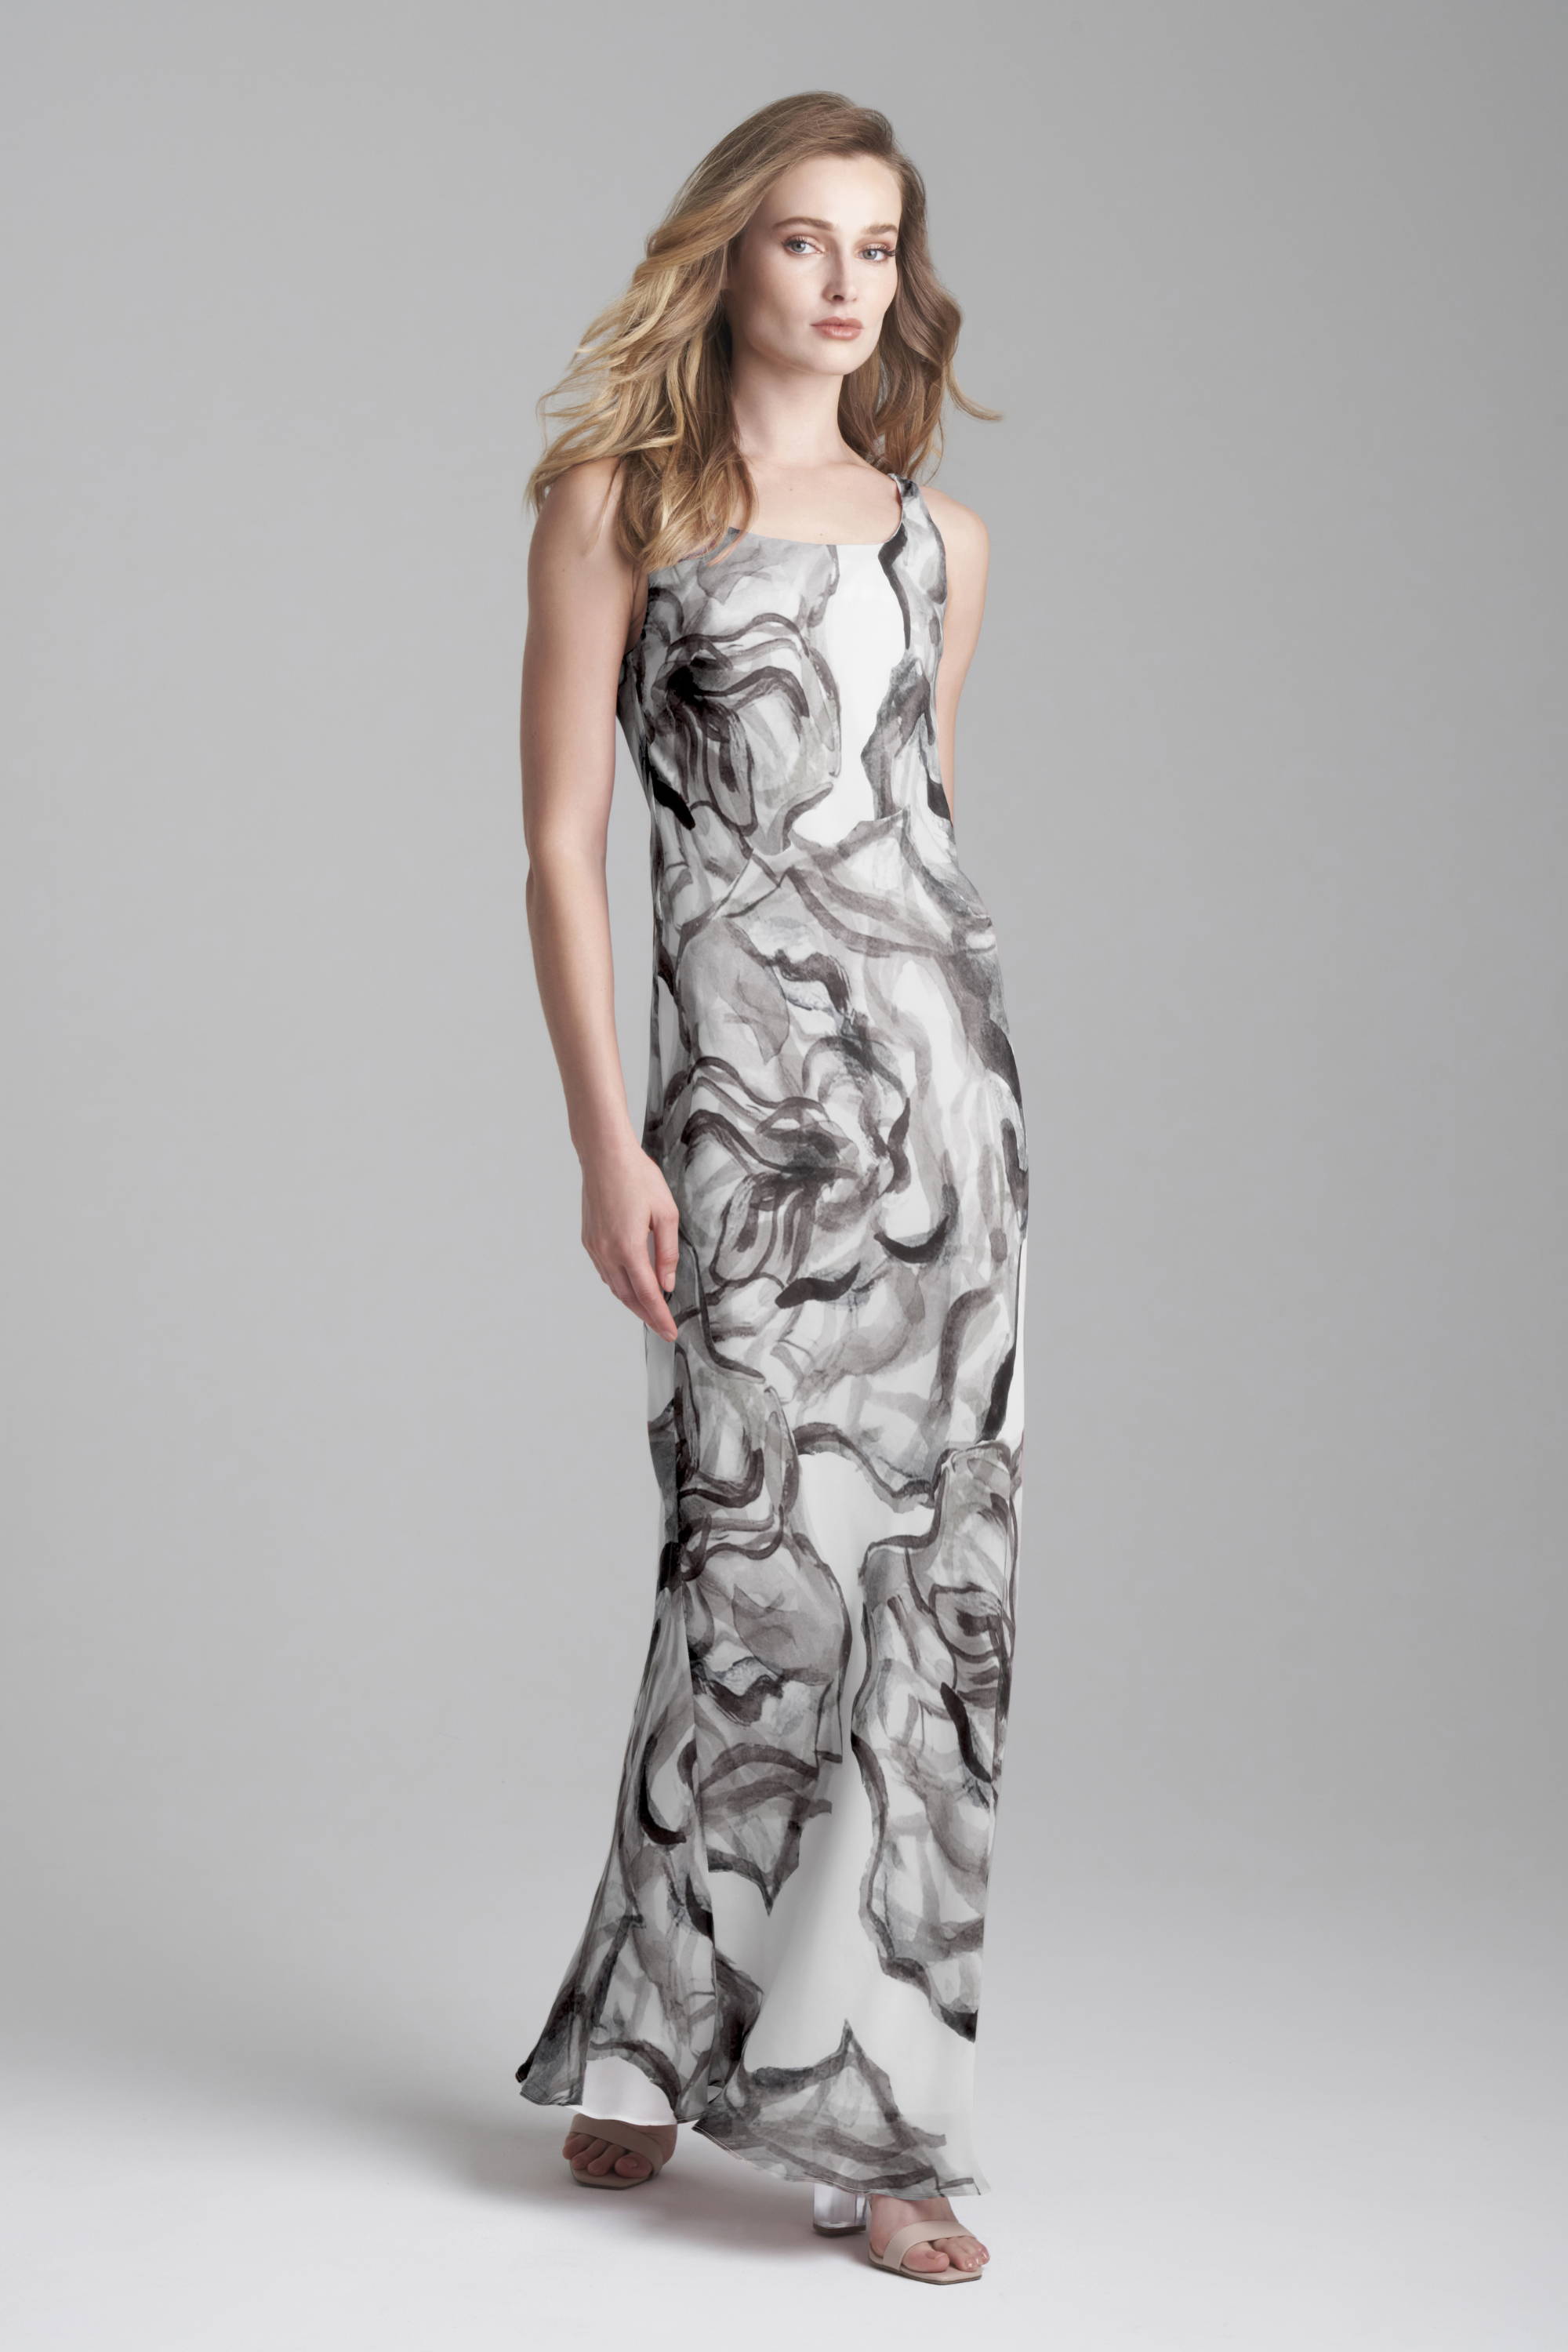 Woman wearing black and white rose printed silk long dress by Ala von Auersperg